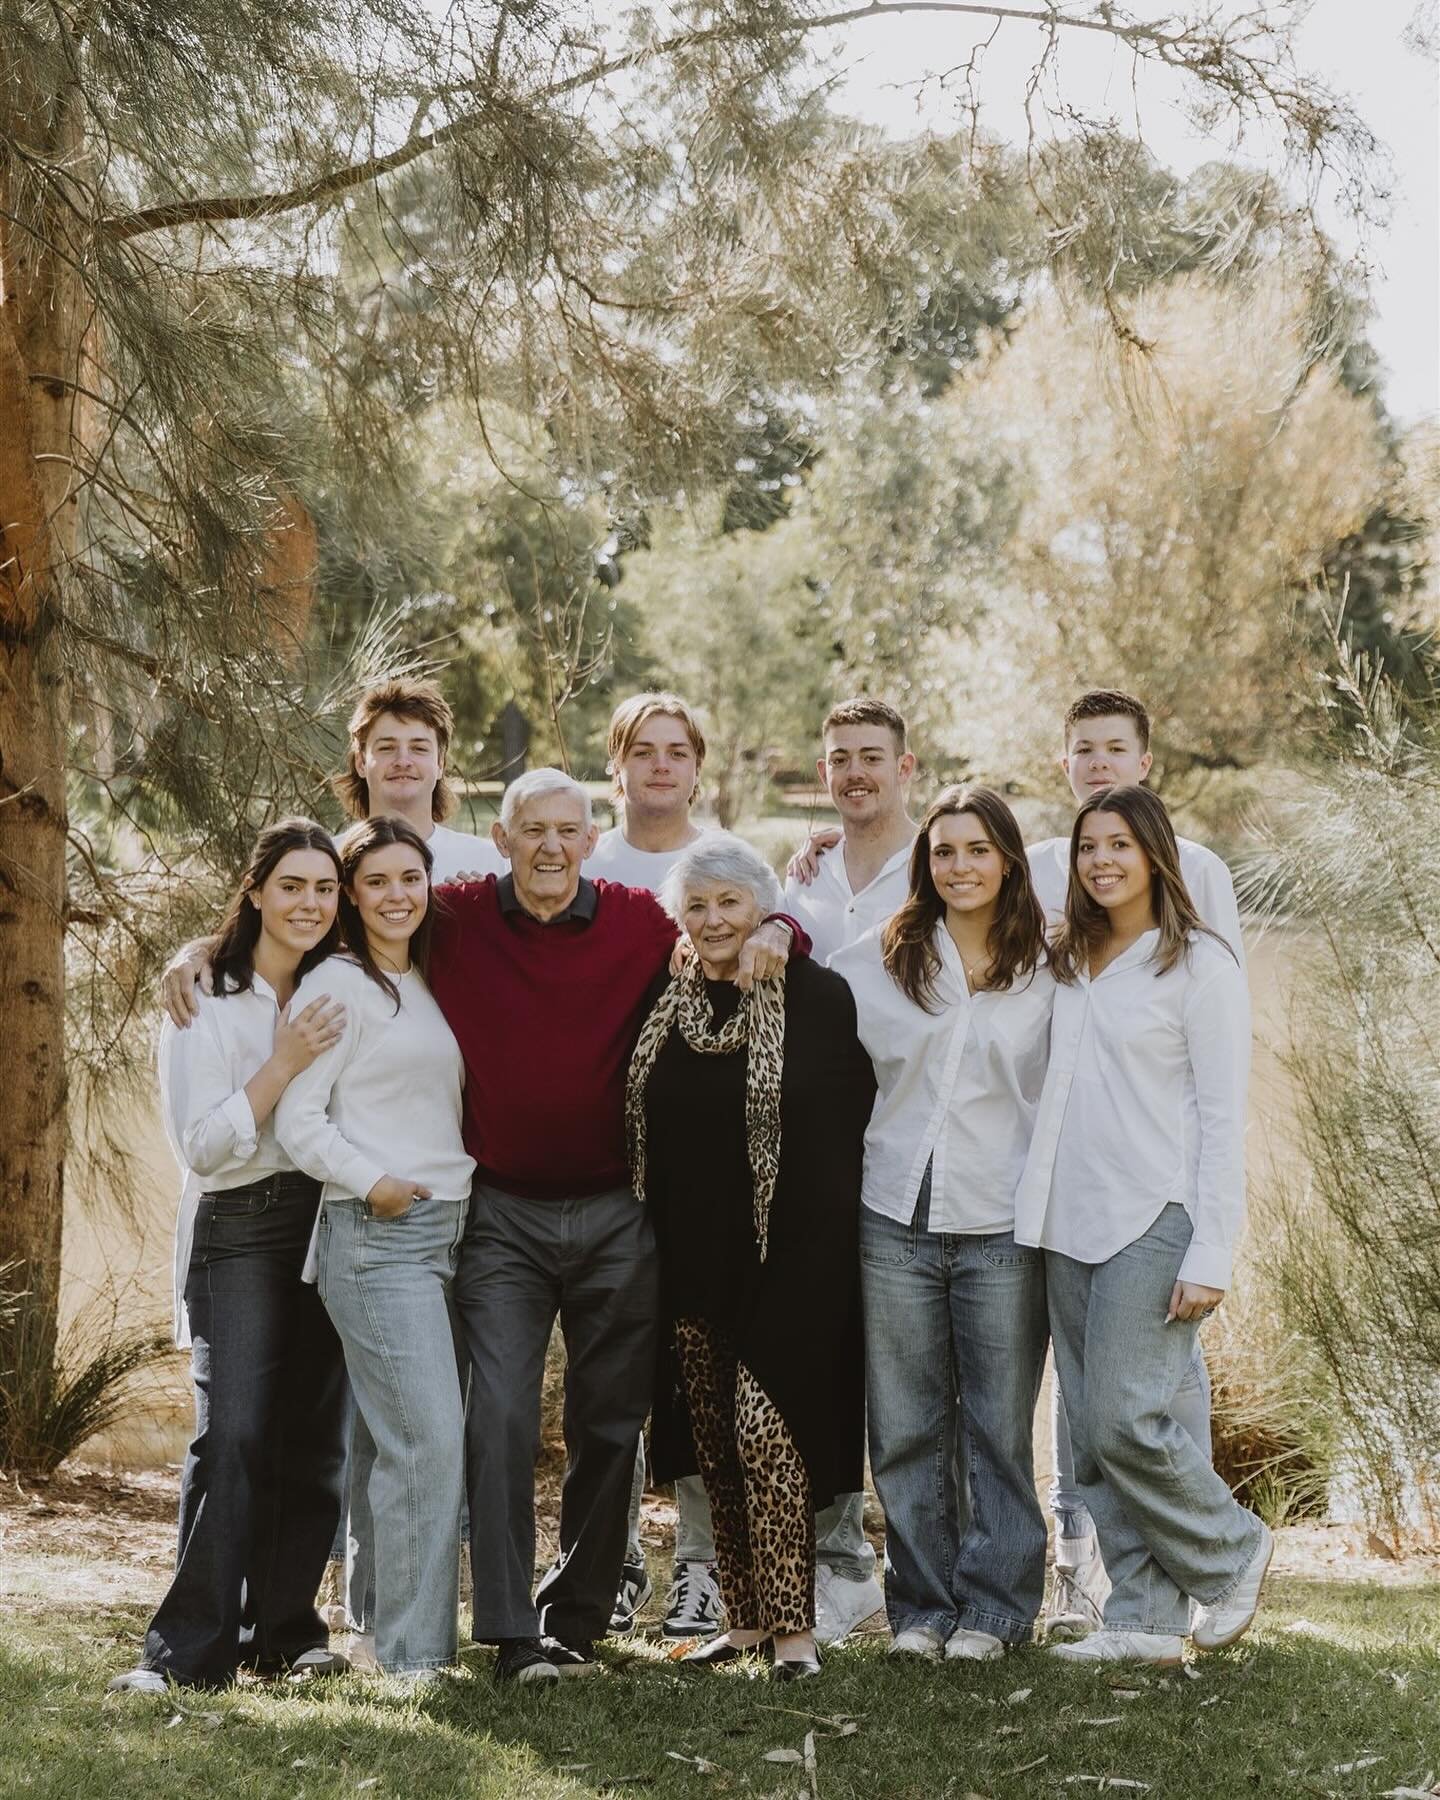 Extended family photoshoot&hellip;cousins getting together surprising their grandparents with morning to remember. We laughed, talked, shared stories&hellip;and I captured it all. Thank you, this was truly special.